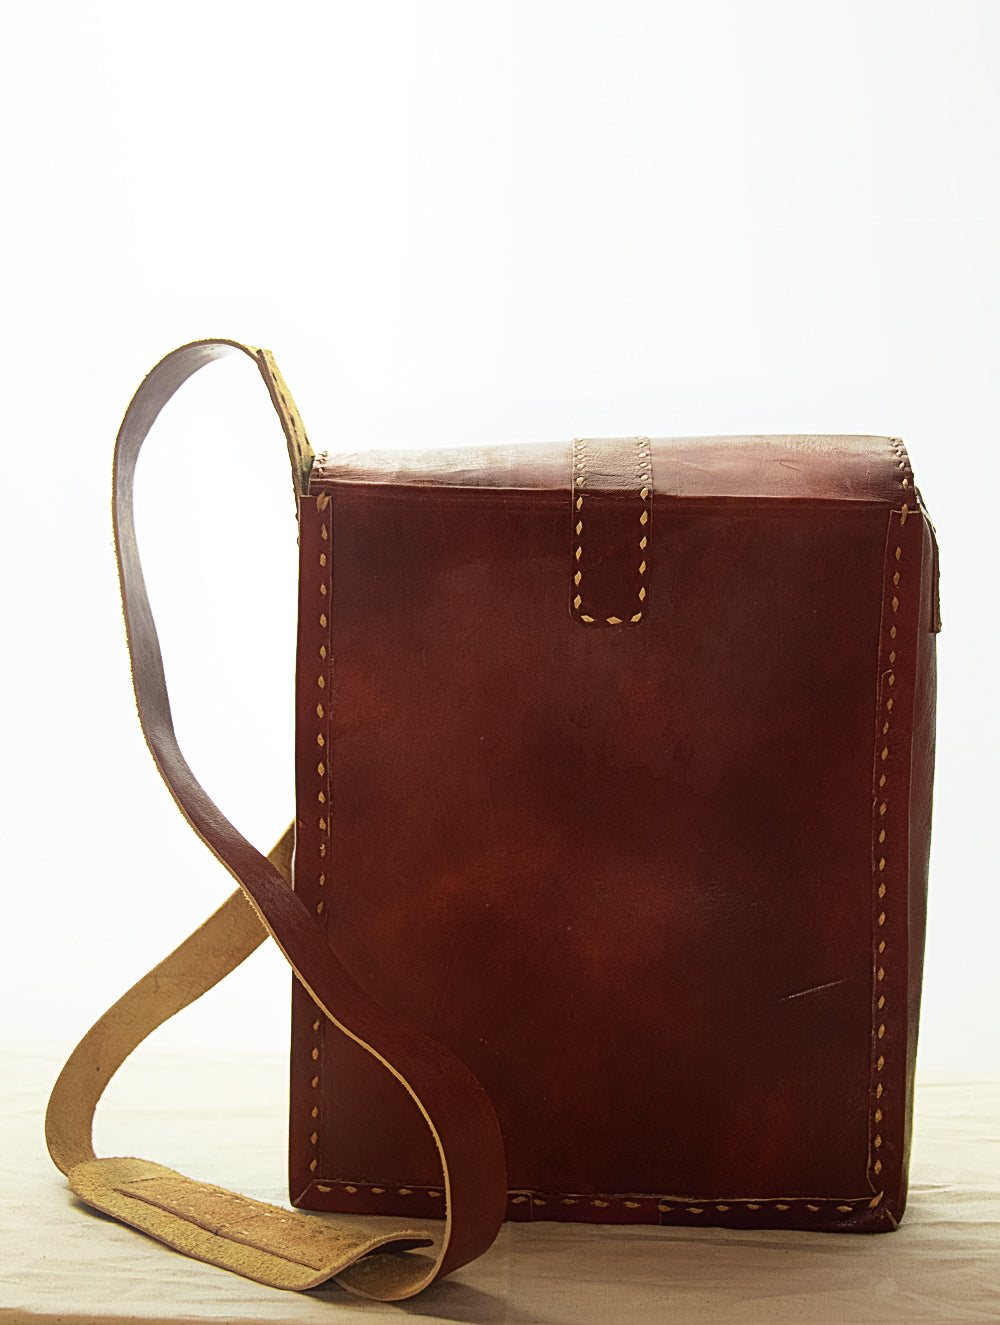 Load image into Gallery viewer, Handcrafted Leather Cross-Body Bag with Hand Stitch Detail - The India Craft House 